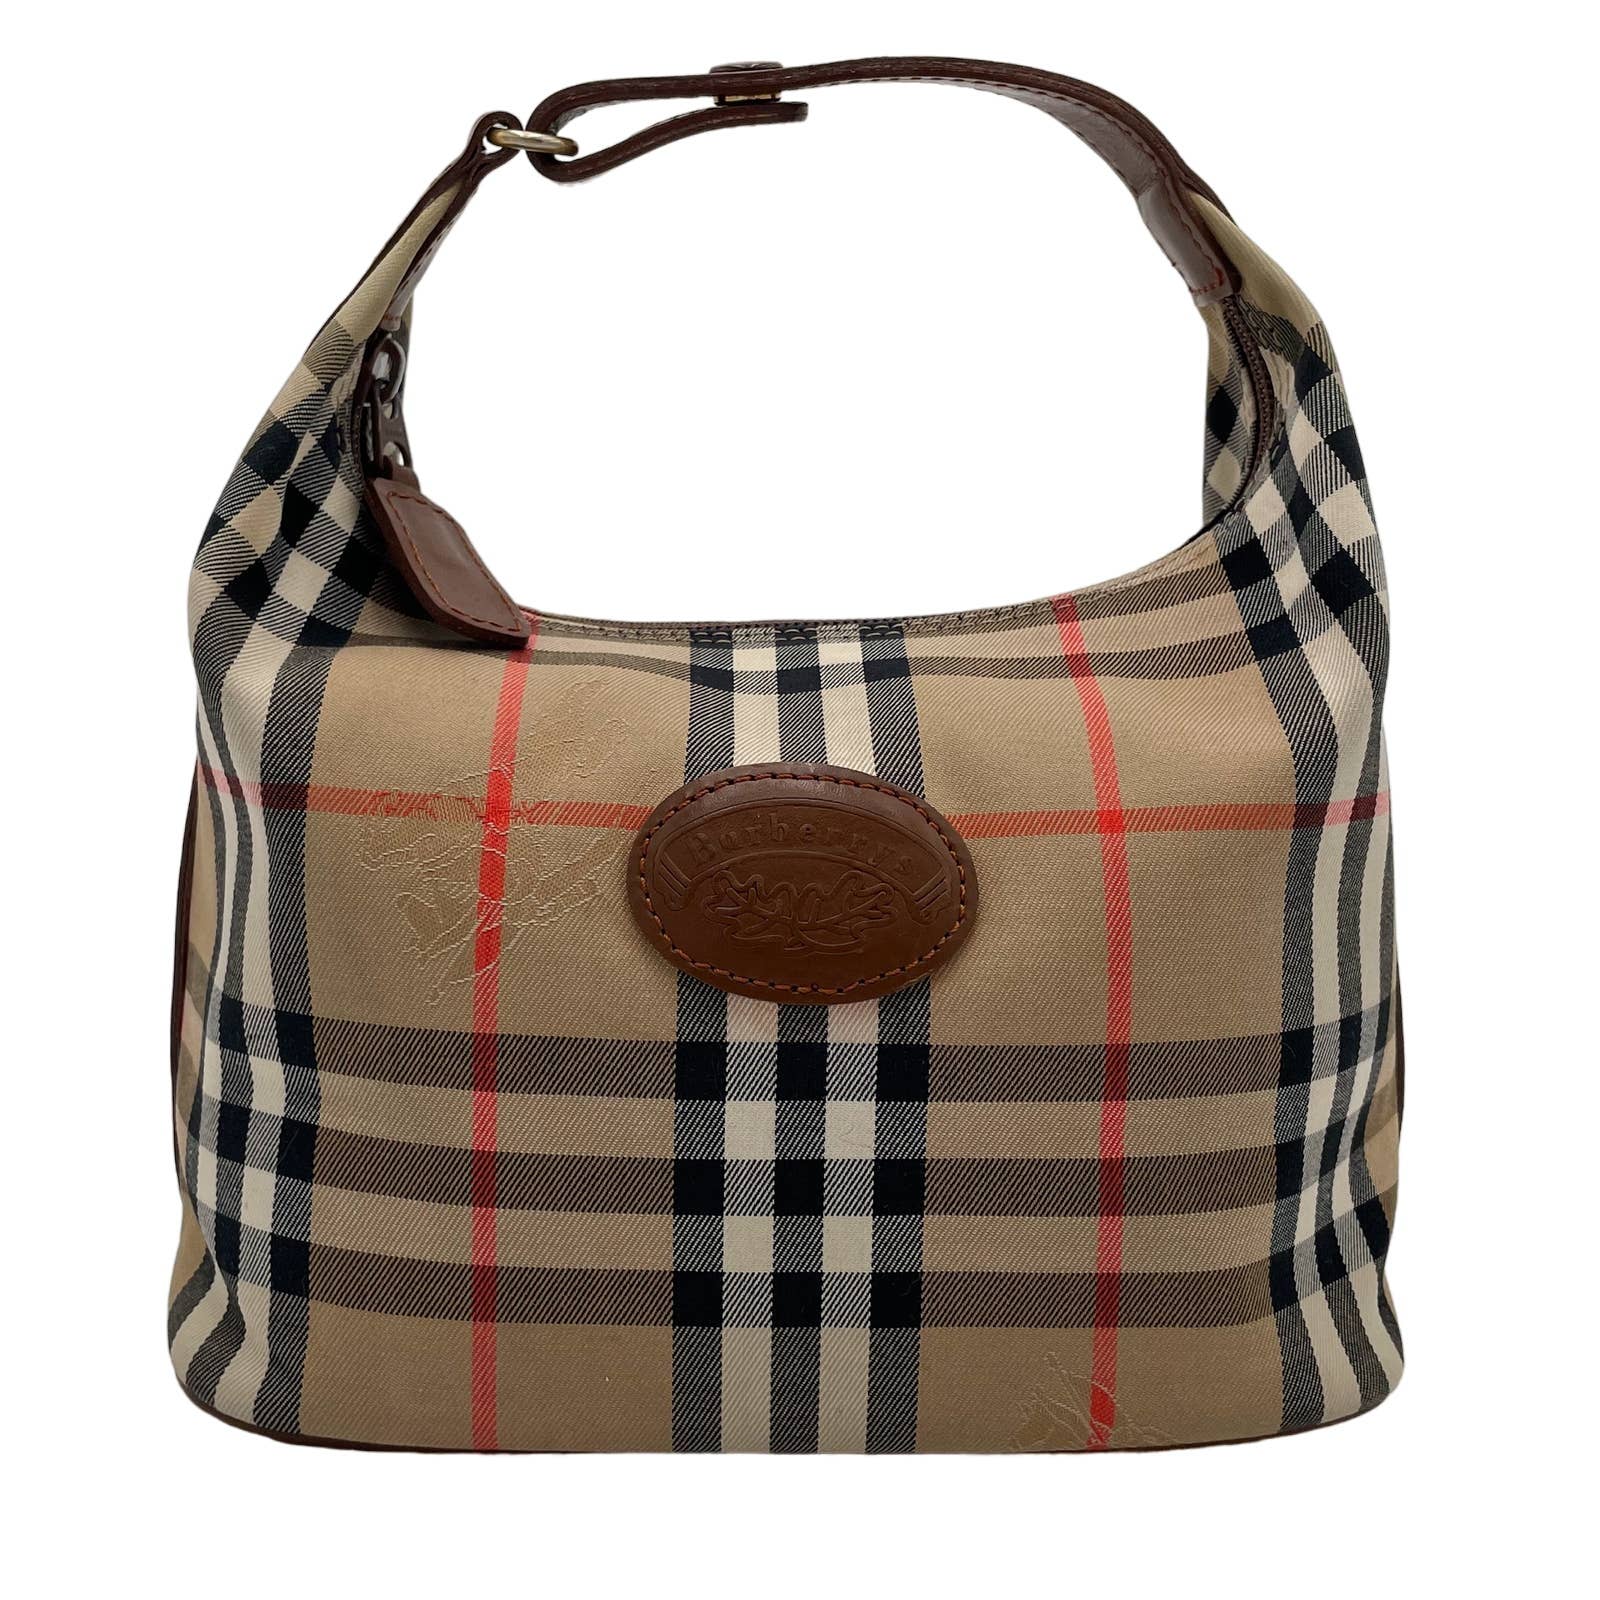 A stylish Burberry Vintage House Check Bag with a classic beige, black, and red tartan plaid pattern. Made from canvas with leather trim, the bag features brown leather handles and a circular brown leather patch with decorative stitching, creating a polished and sophisticated appearance. A zip top ensures your essentials are secure.